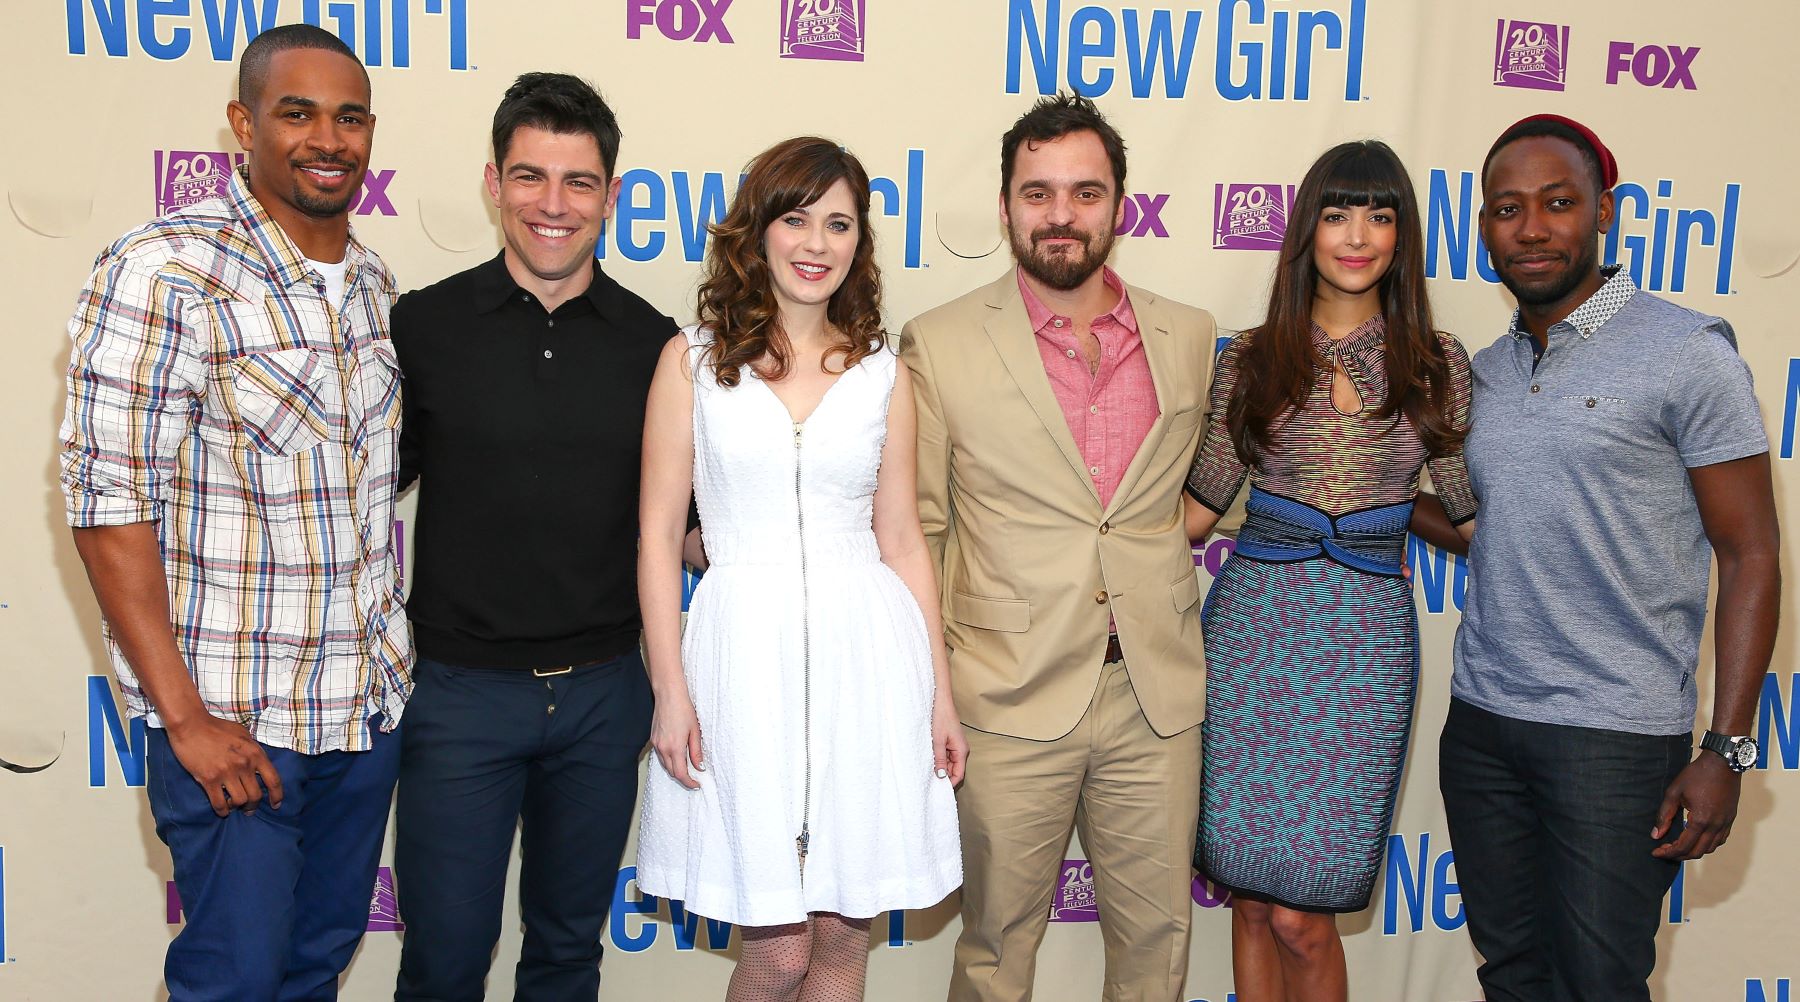 The cast of the FOX tv show 'New Girl' at a screening of the Season 3 finale in Los Angeles, California